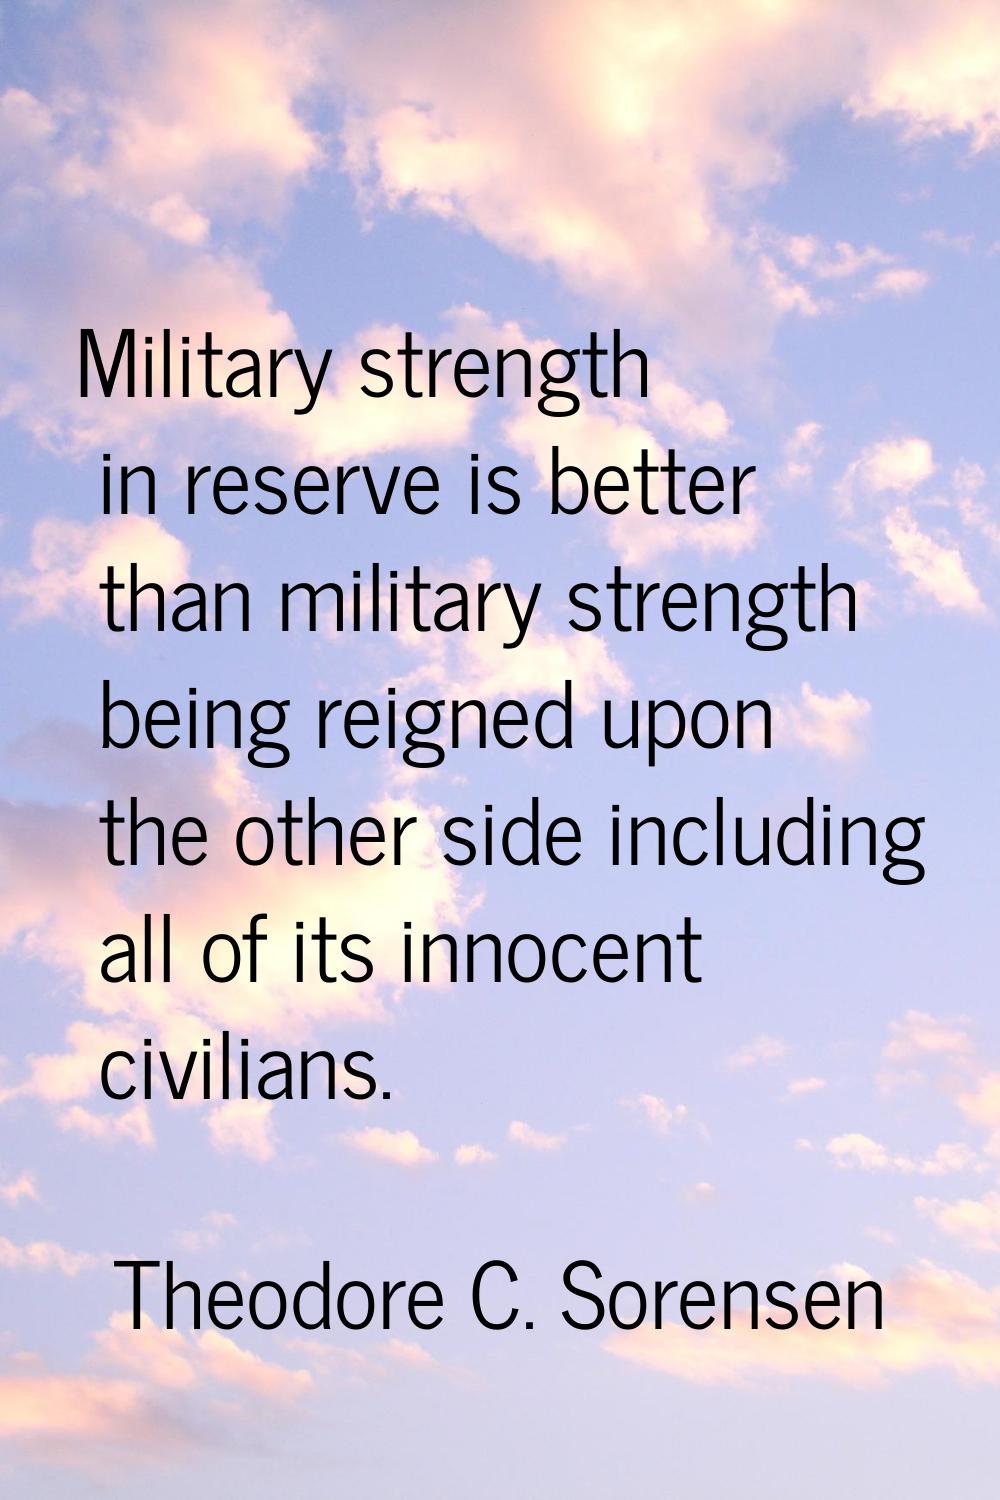 Military strength in reserve is better than military strength being reigned upon the other side inc